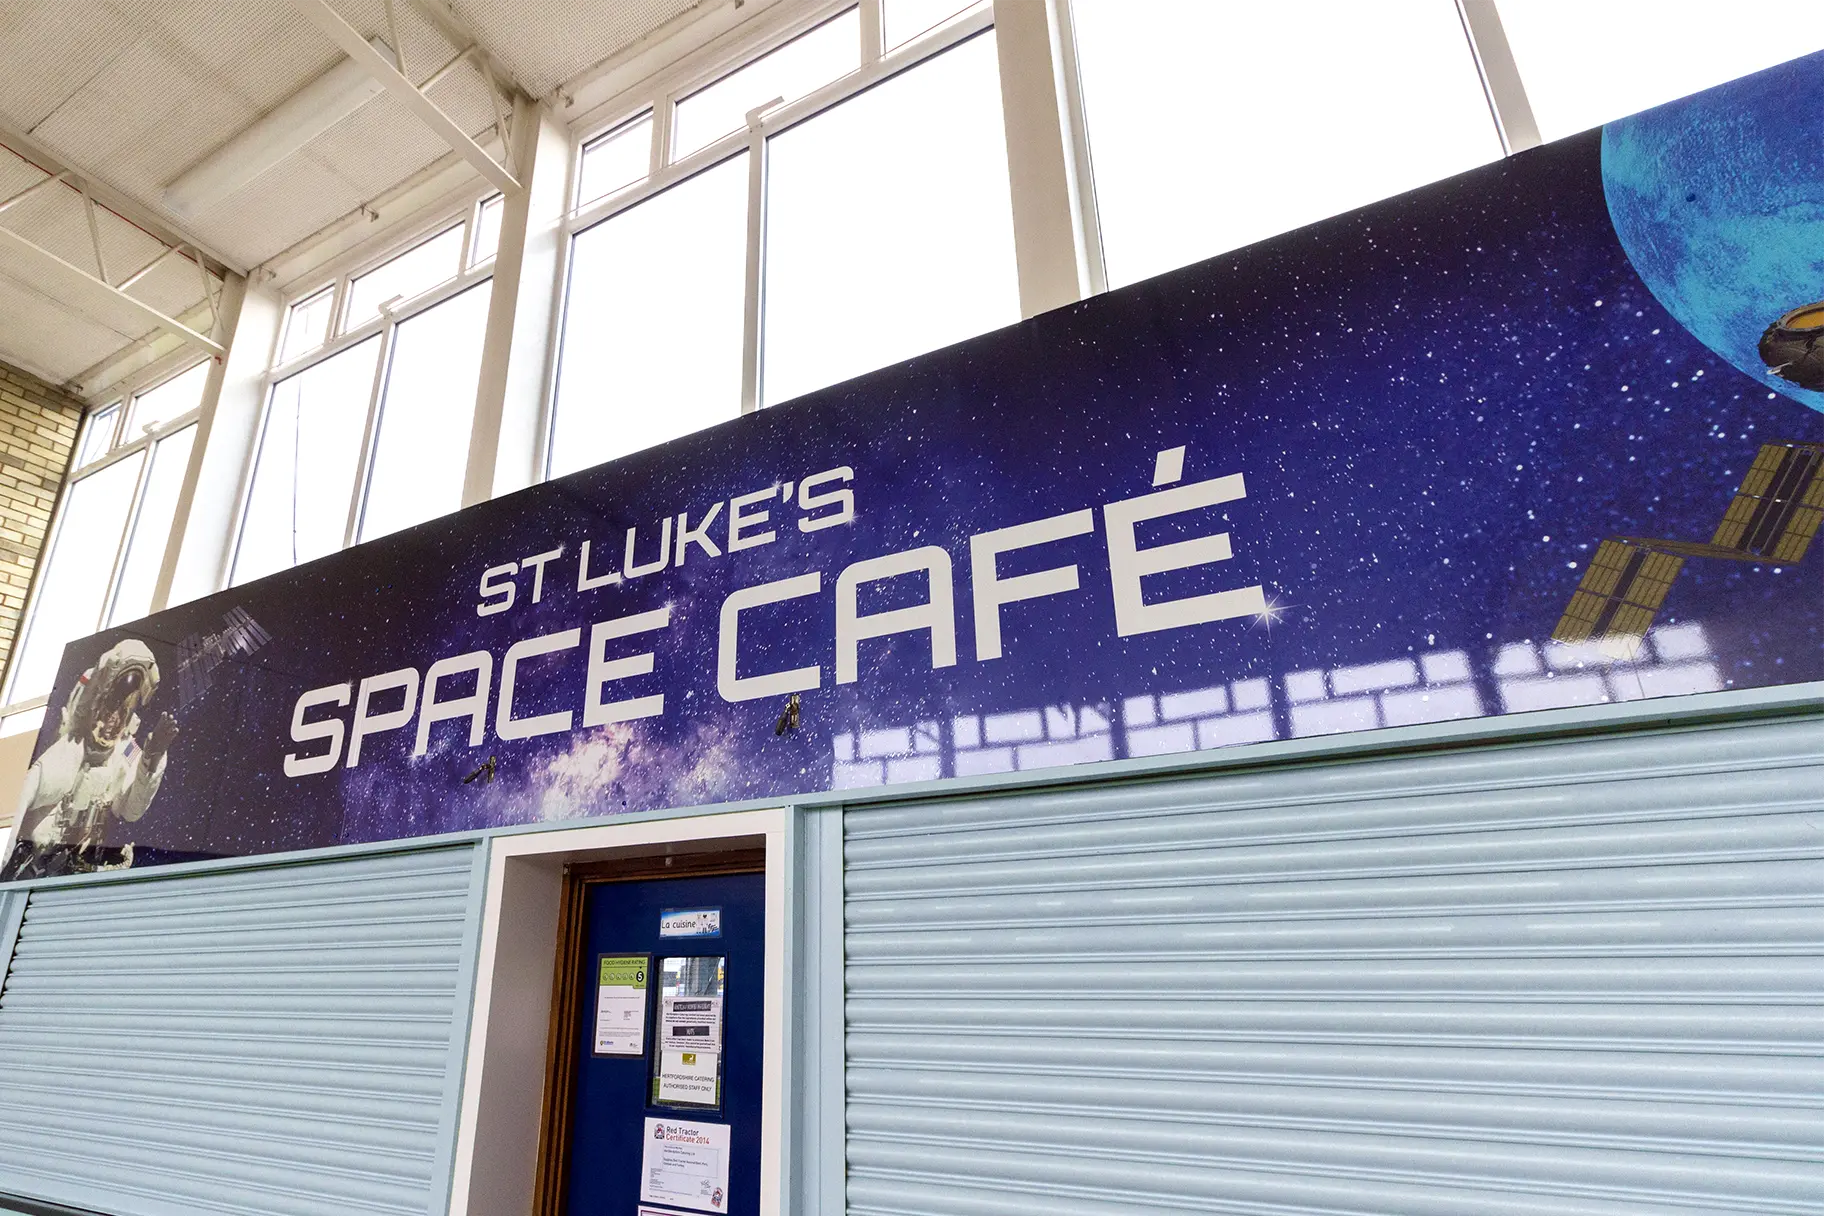 St Lukes Solar System space cafe Wall Art